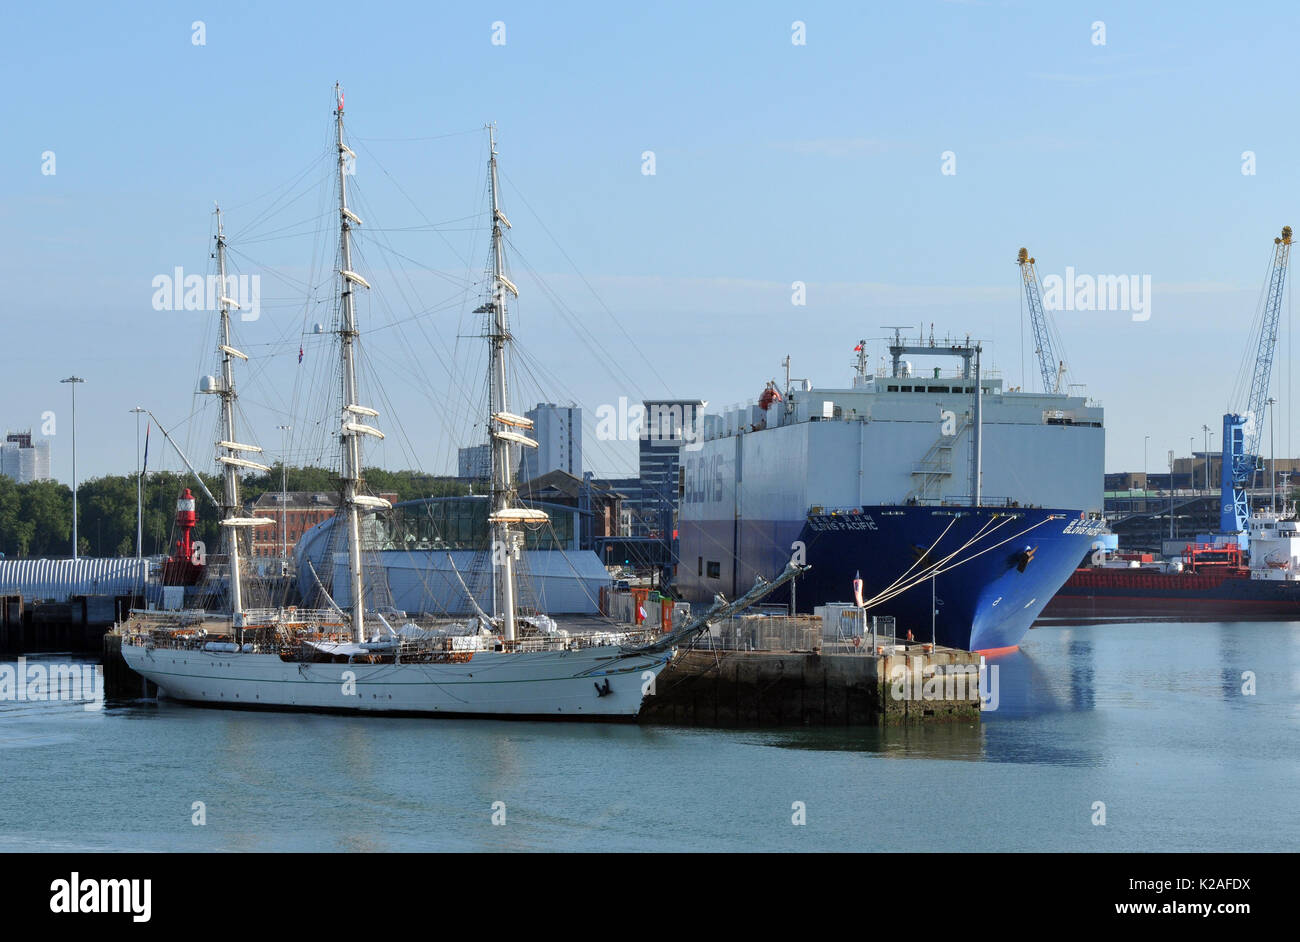 a modern car carrying ship transpoters and an old sailing ship or vessel together alongside at Southampton docks uk port contrast between new and old Stock Photo